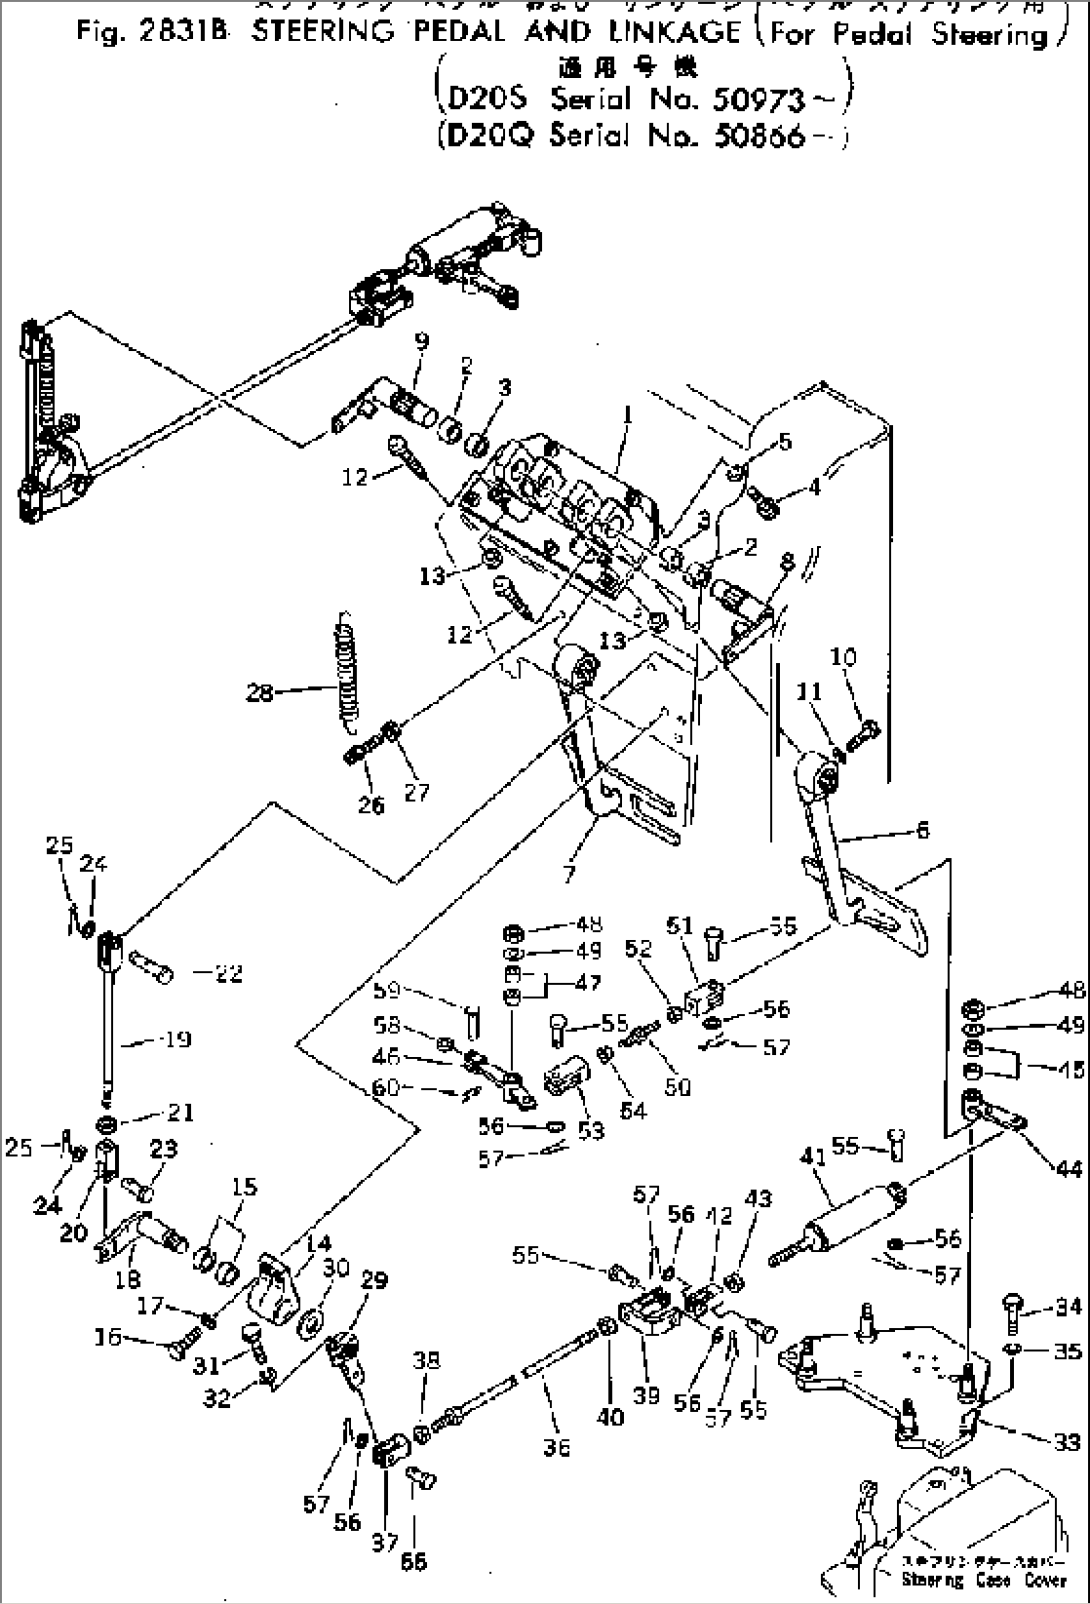 STEERING PEDAL AND LINKAGE (FOR PEDAL STEERING)(#50866-)